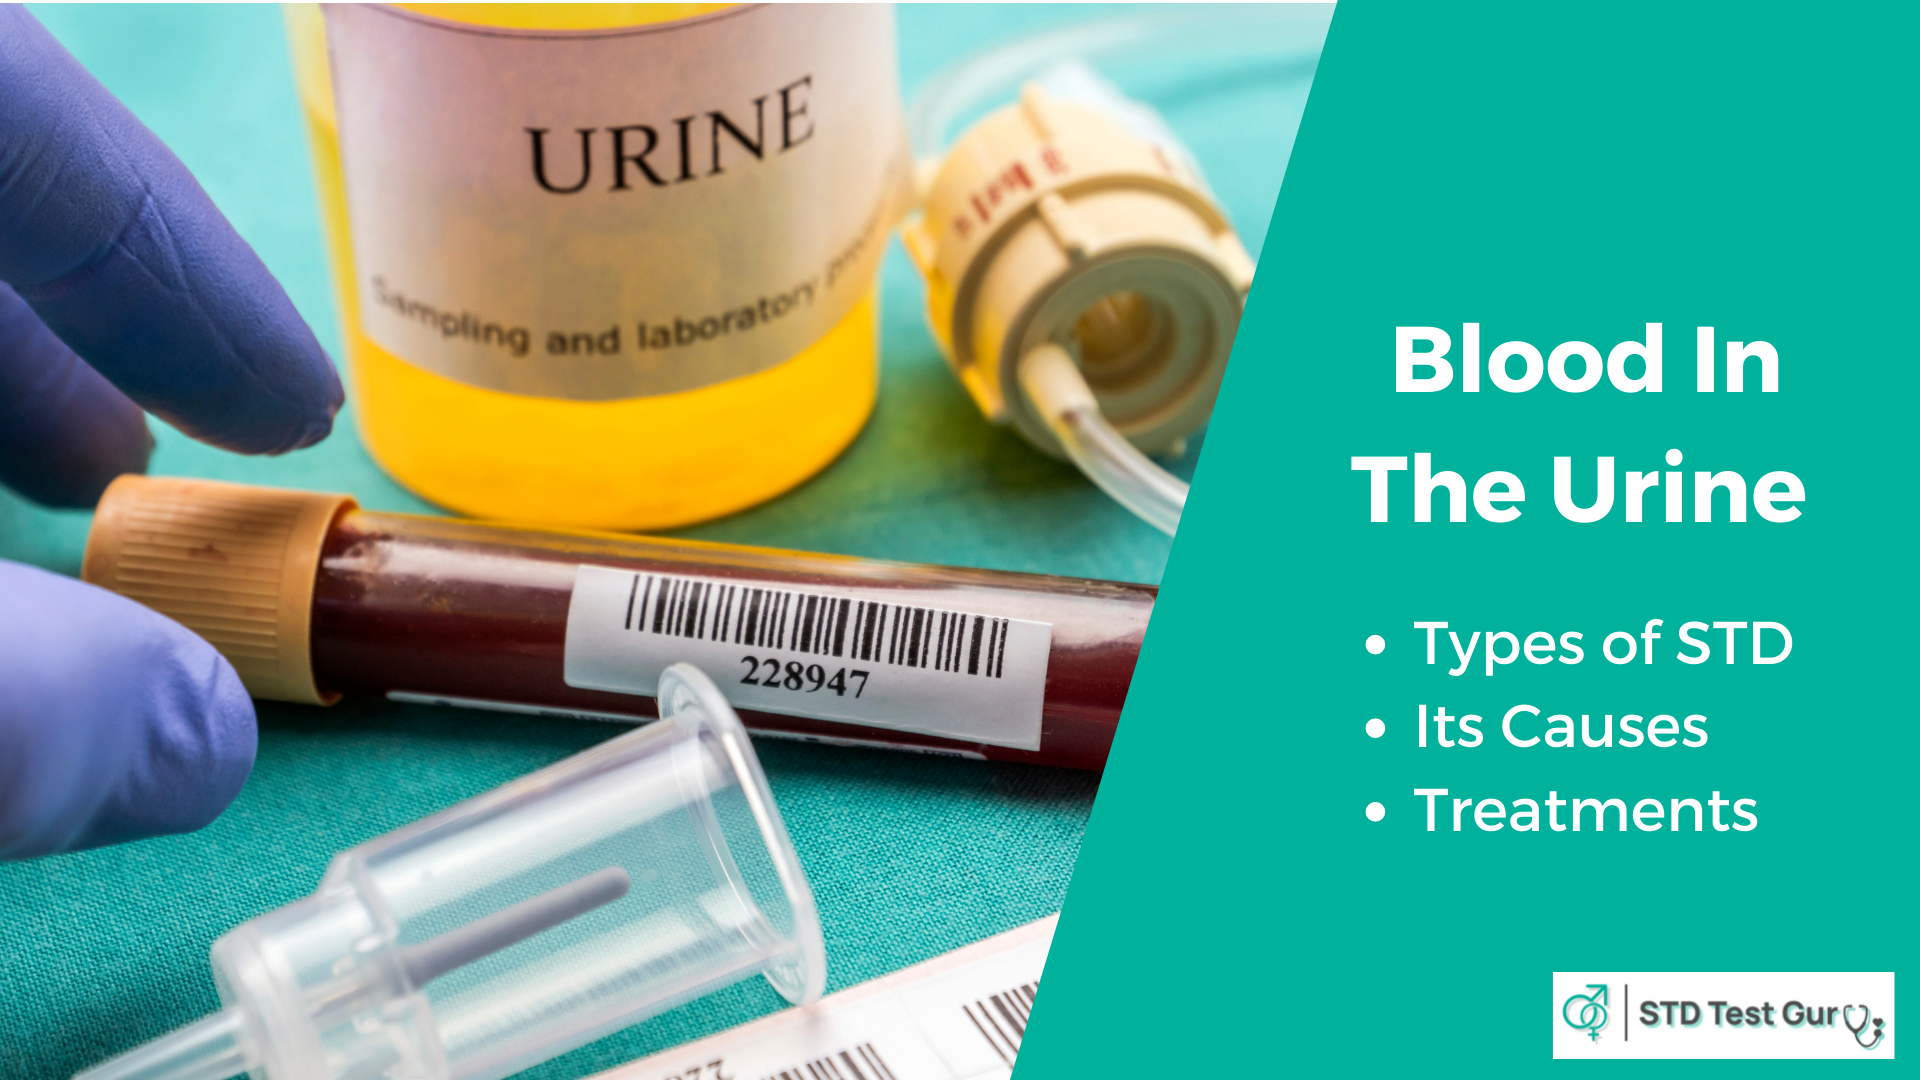 In this artice, we brief you about the causes of blood in the urine, its treatments and symptoms.